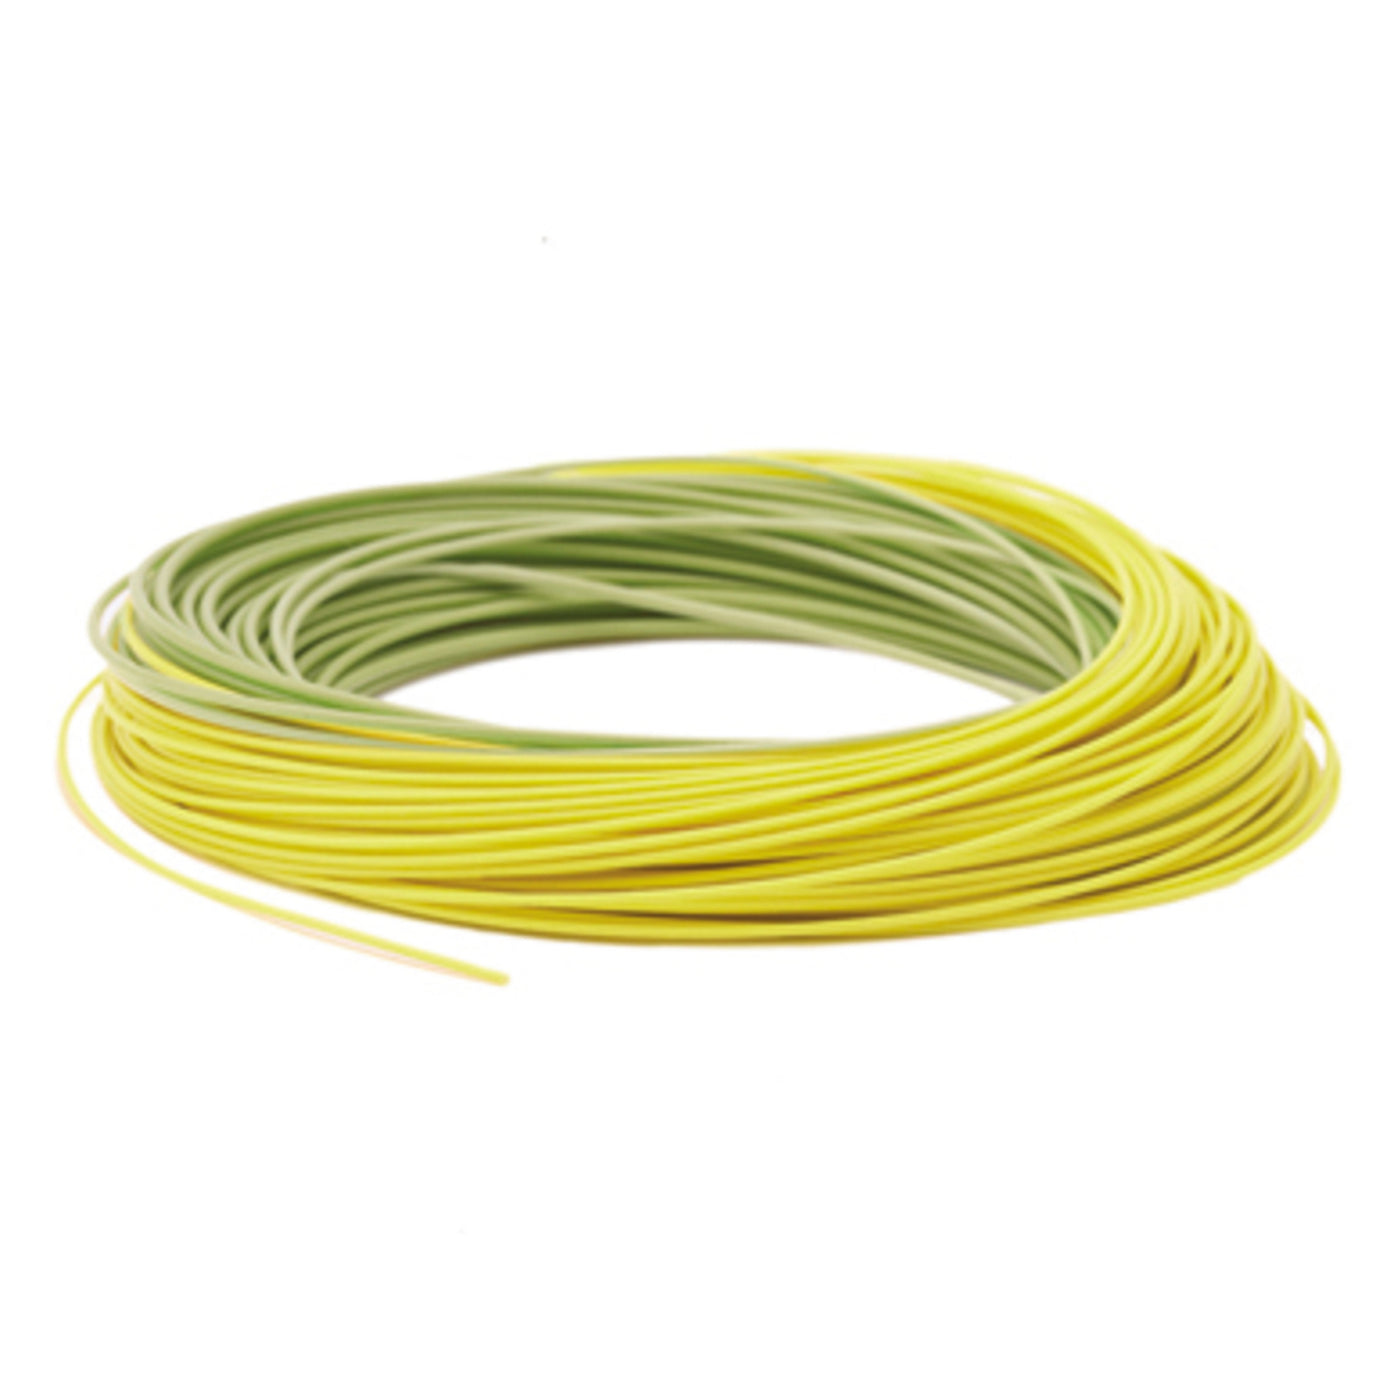 Rio Gold Fly Line (Premier) WF3F / Moss/Gold